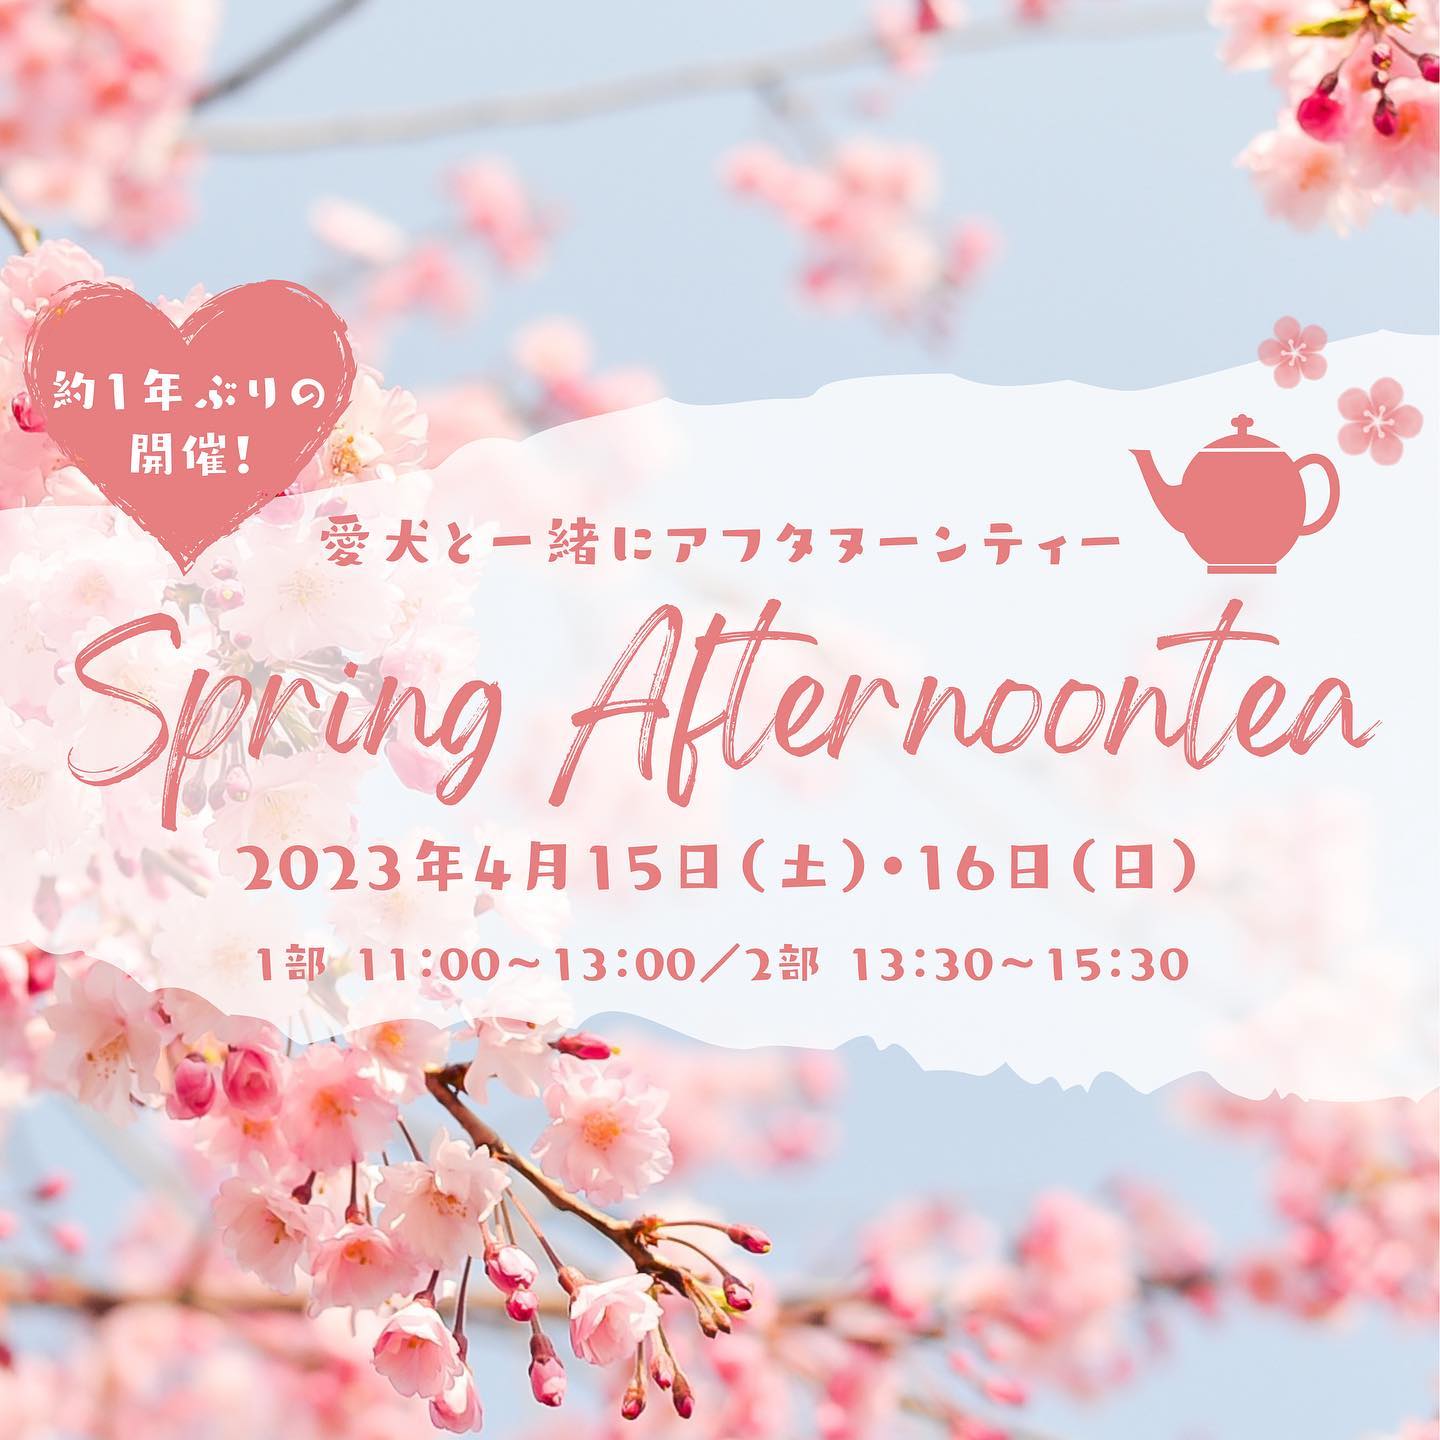 Spring Afternoon teaの画像